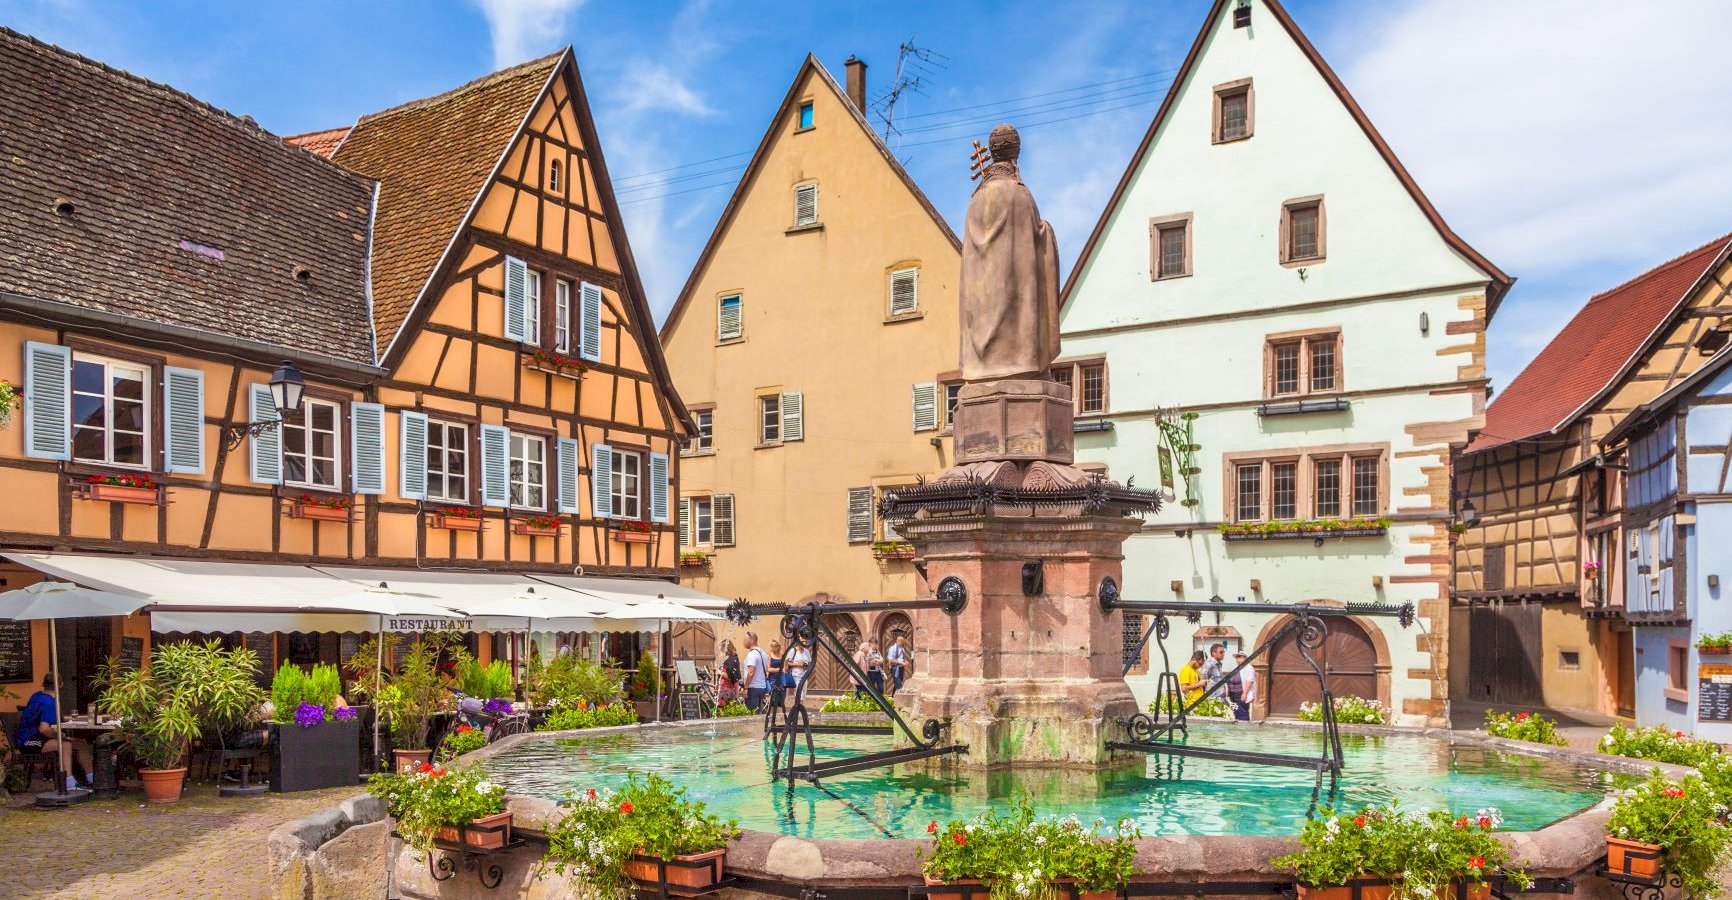 Ophorus Tours - 4 Days Small Group Alsace Packages - Strasbourg - 4* Hotel